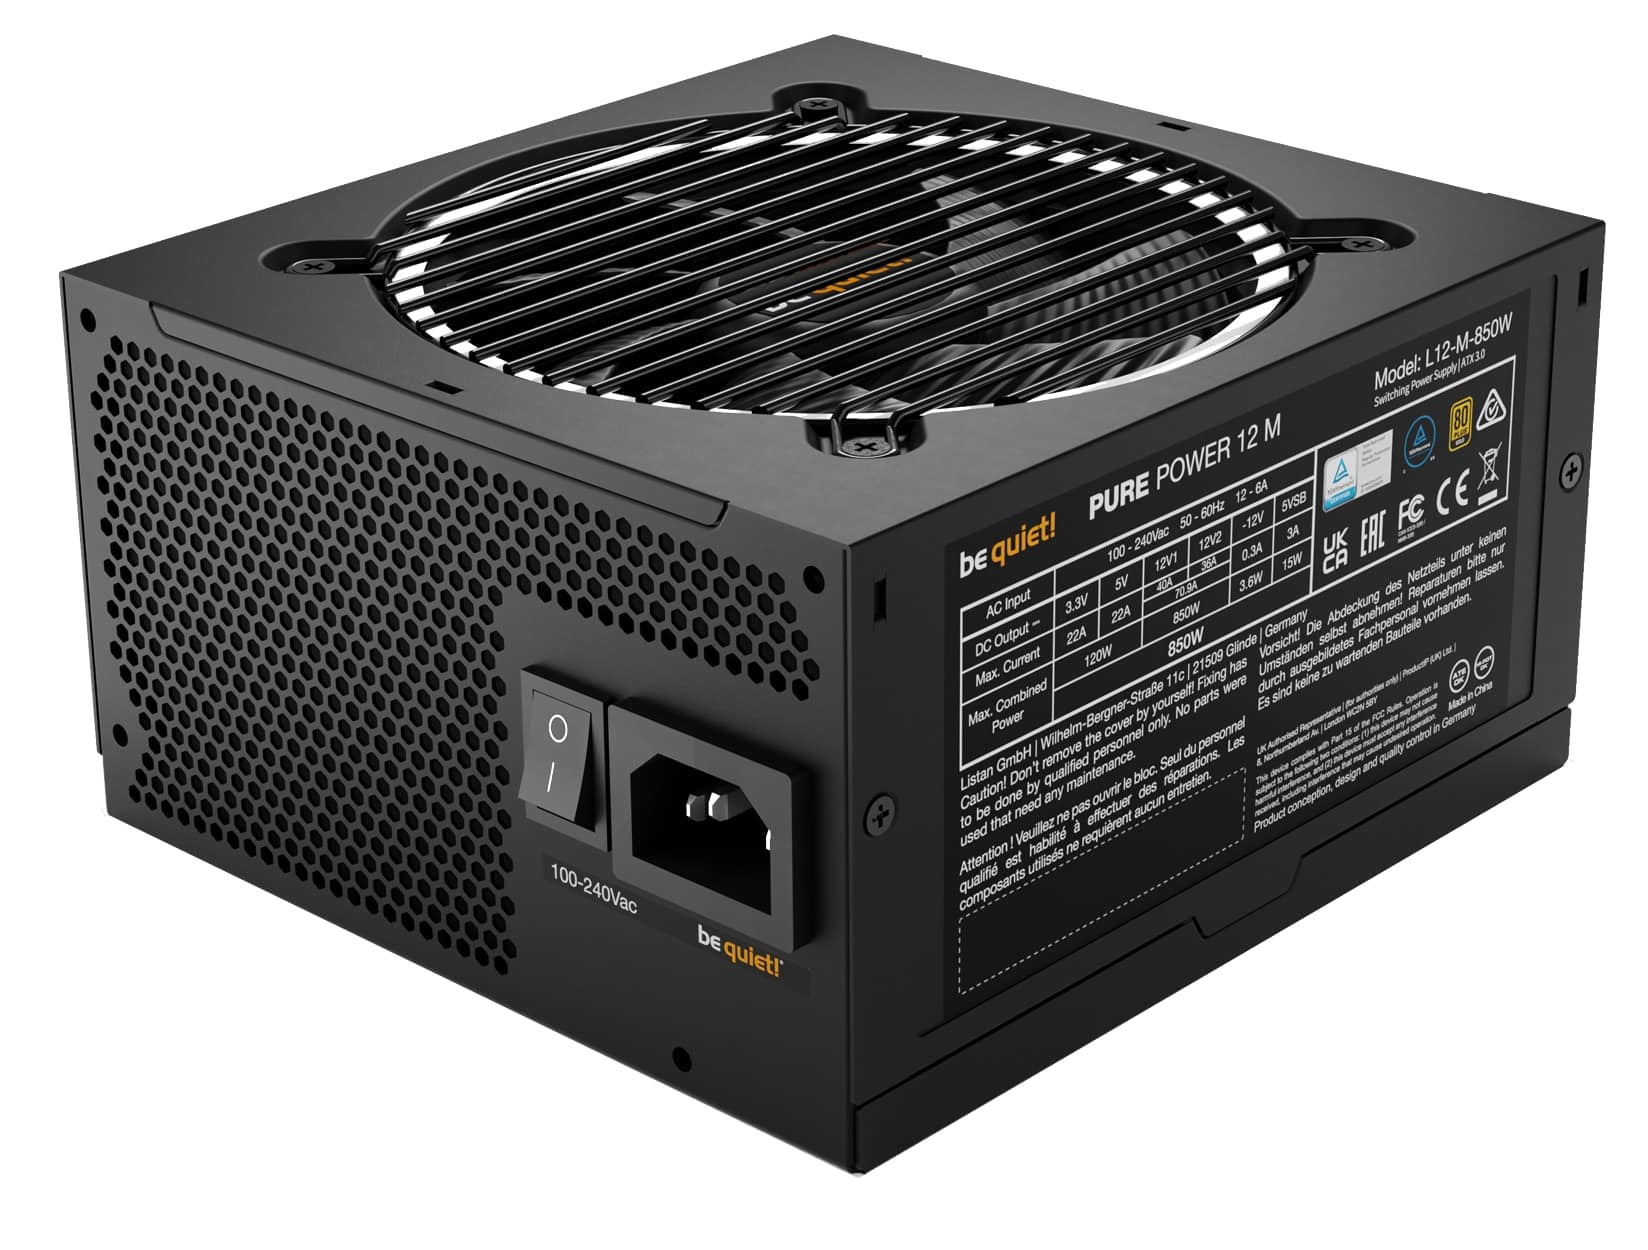 BE QUIET! Pure Power 12M 850W